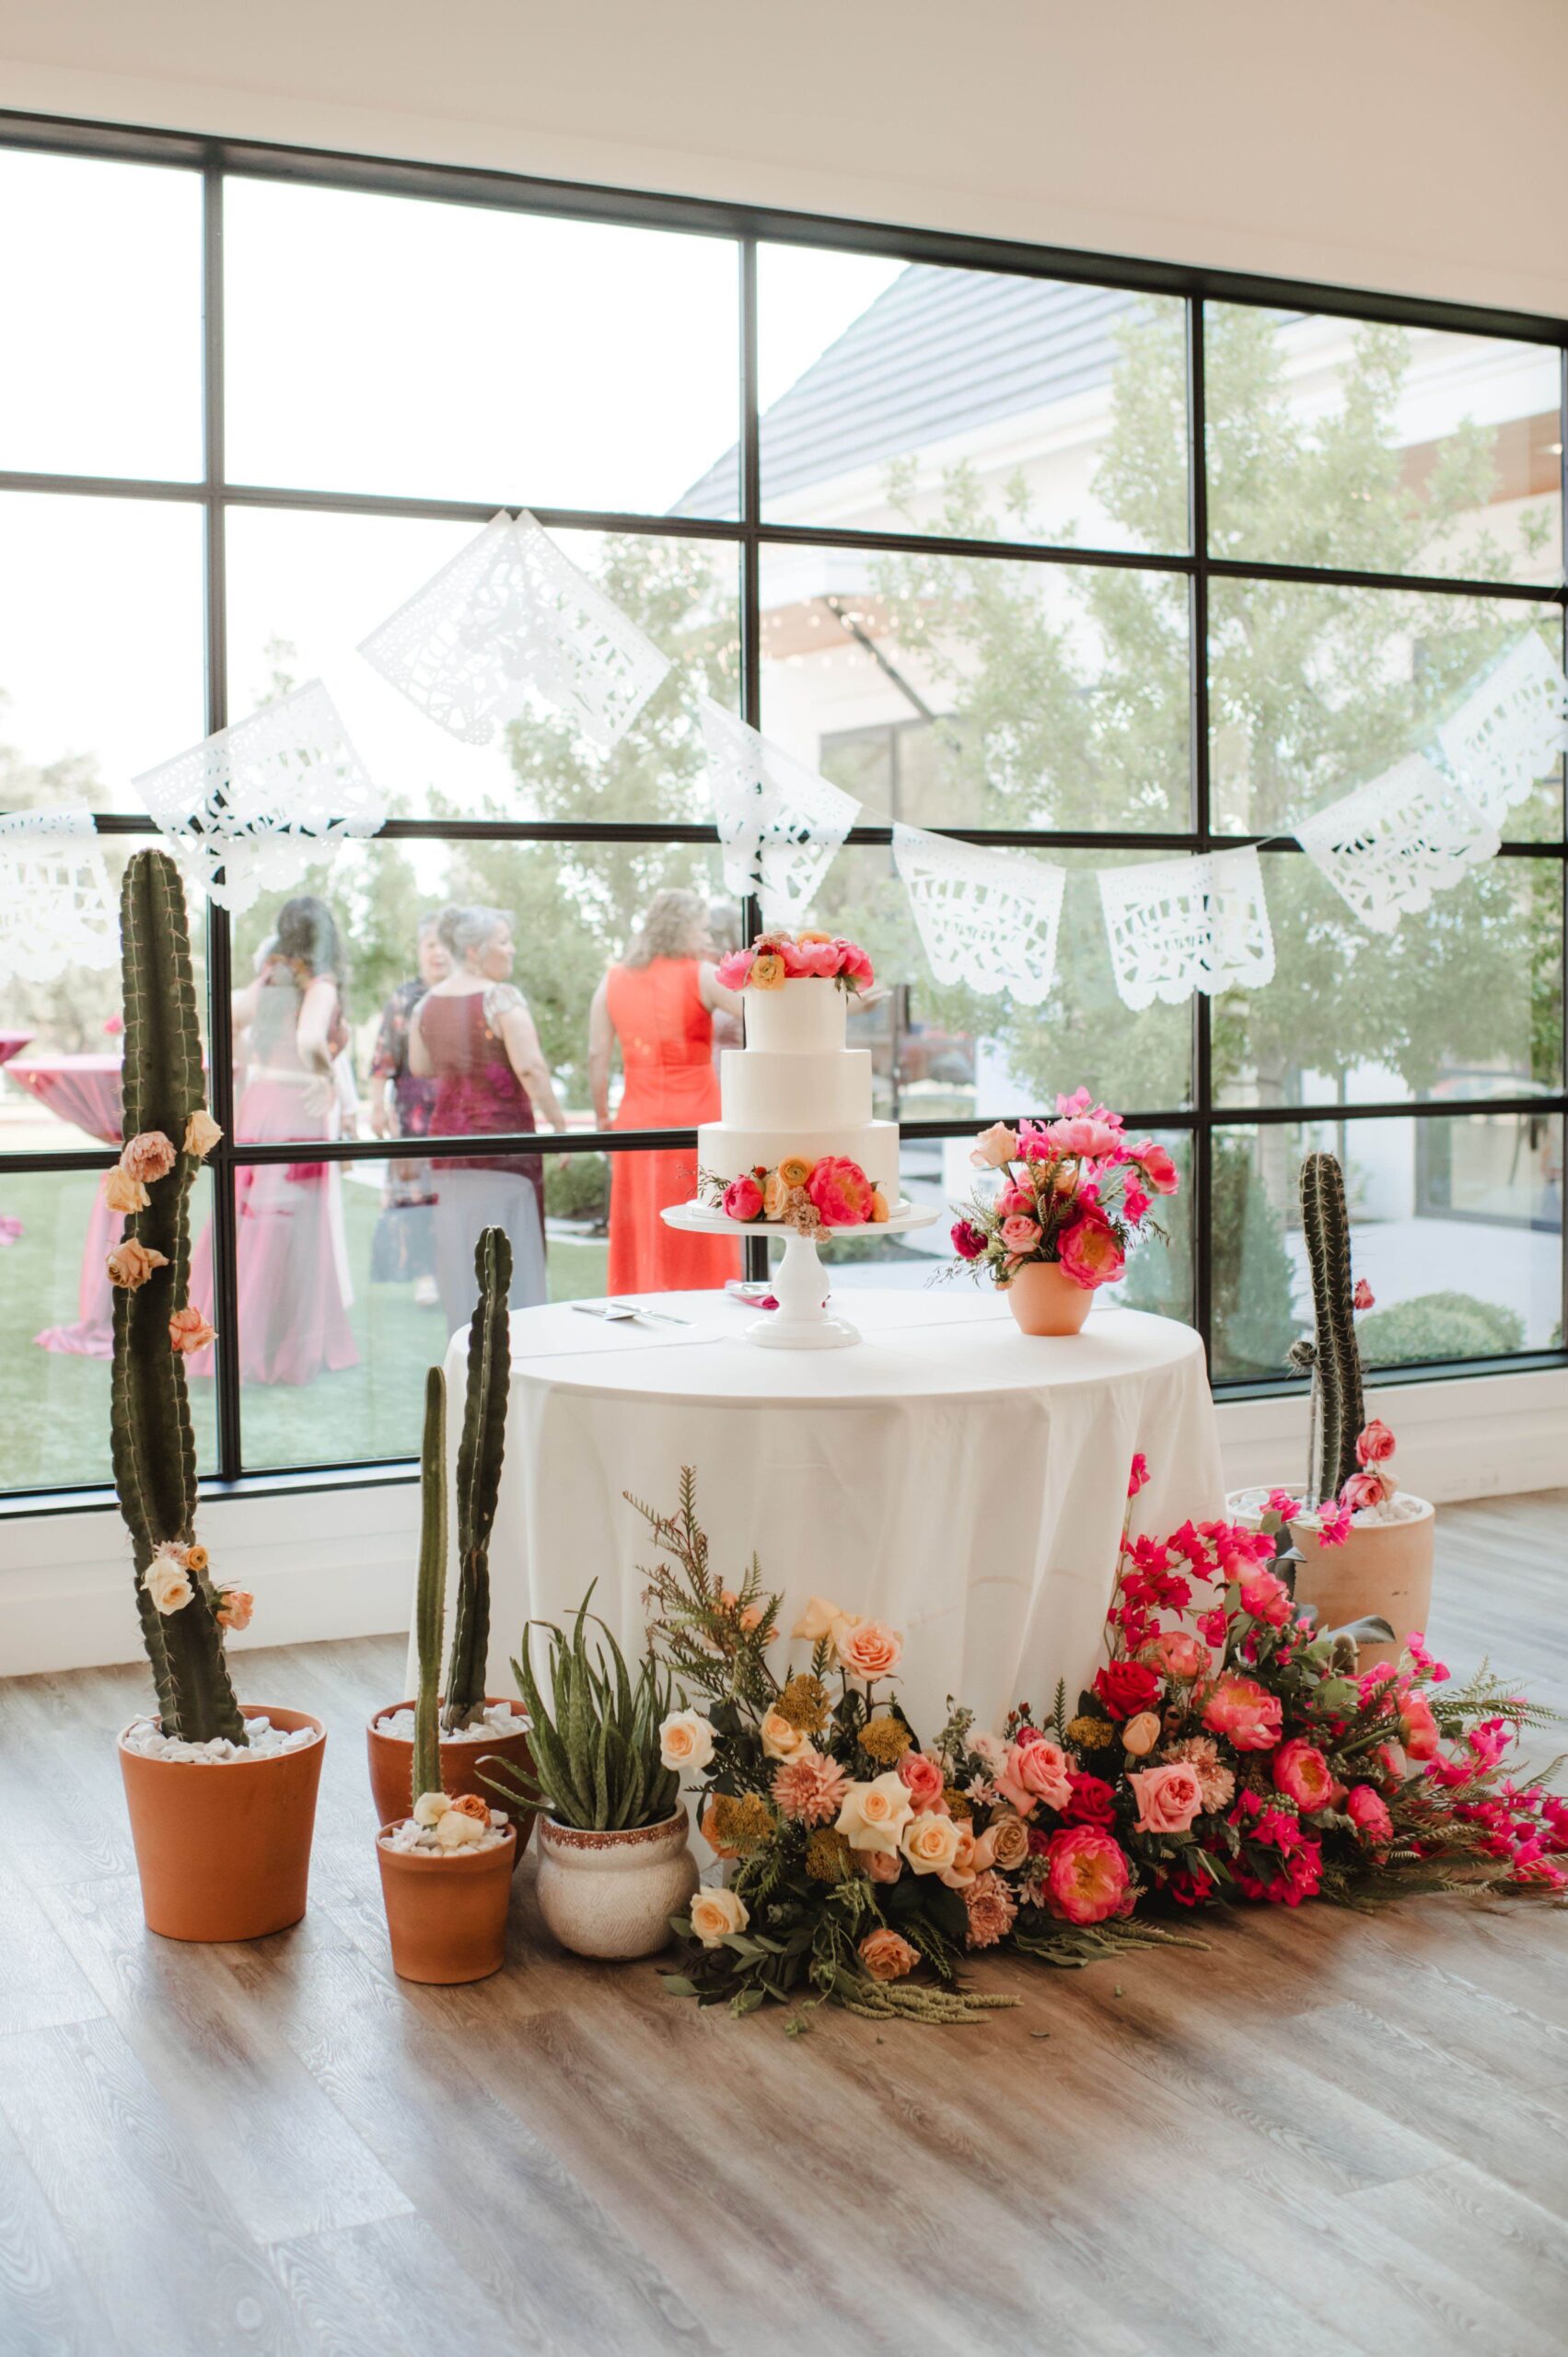 Summer wedding cake with bright pink flowers, cactus, and custom papel picado